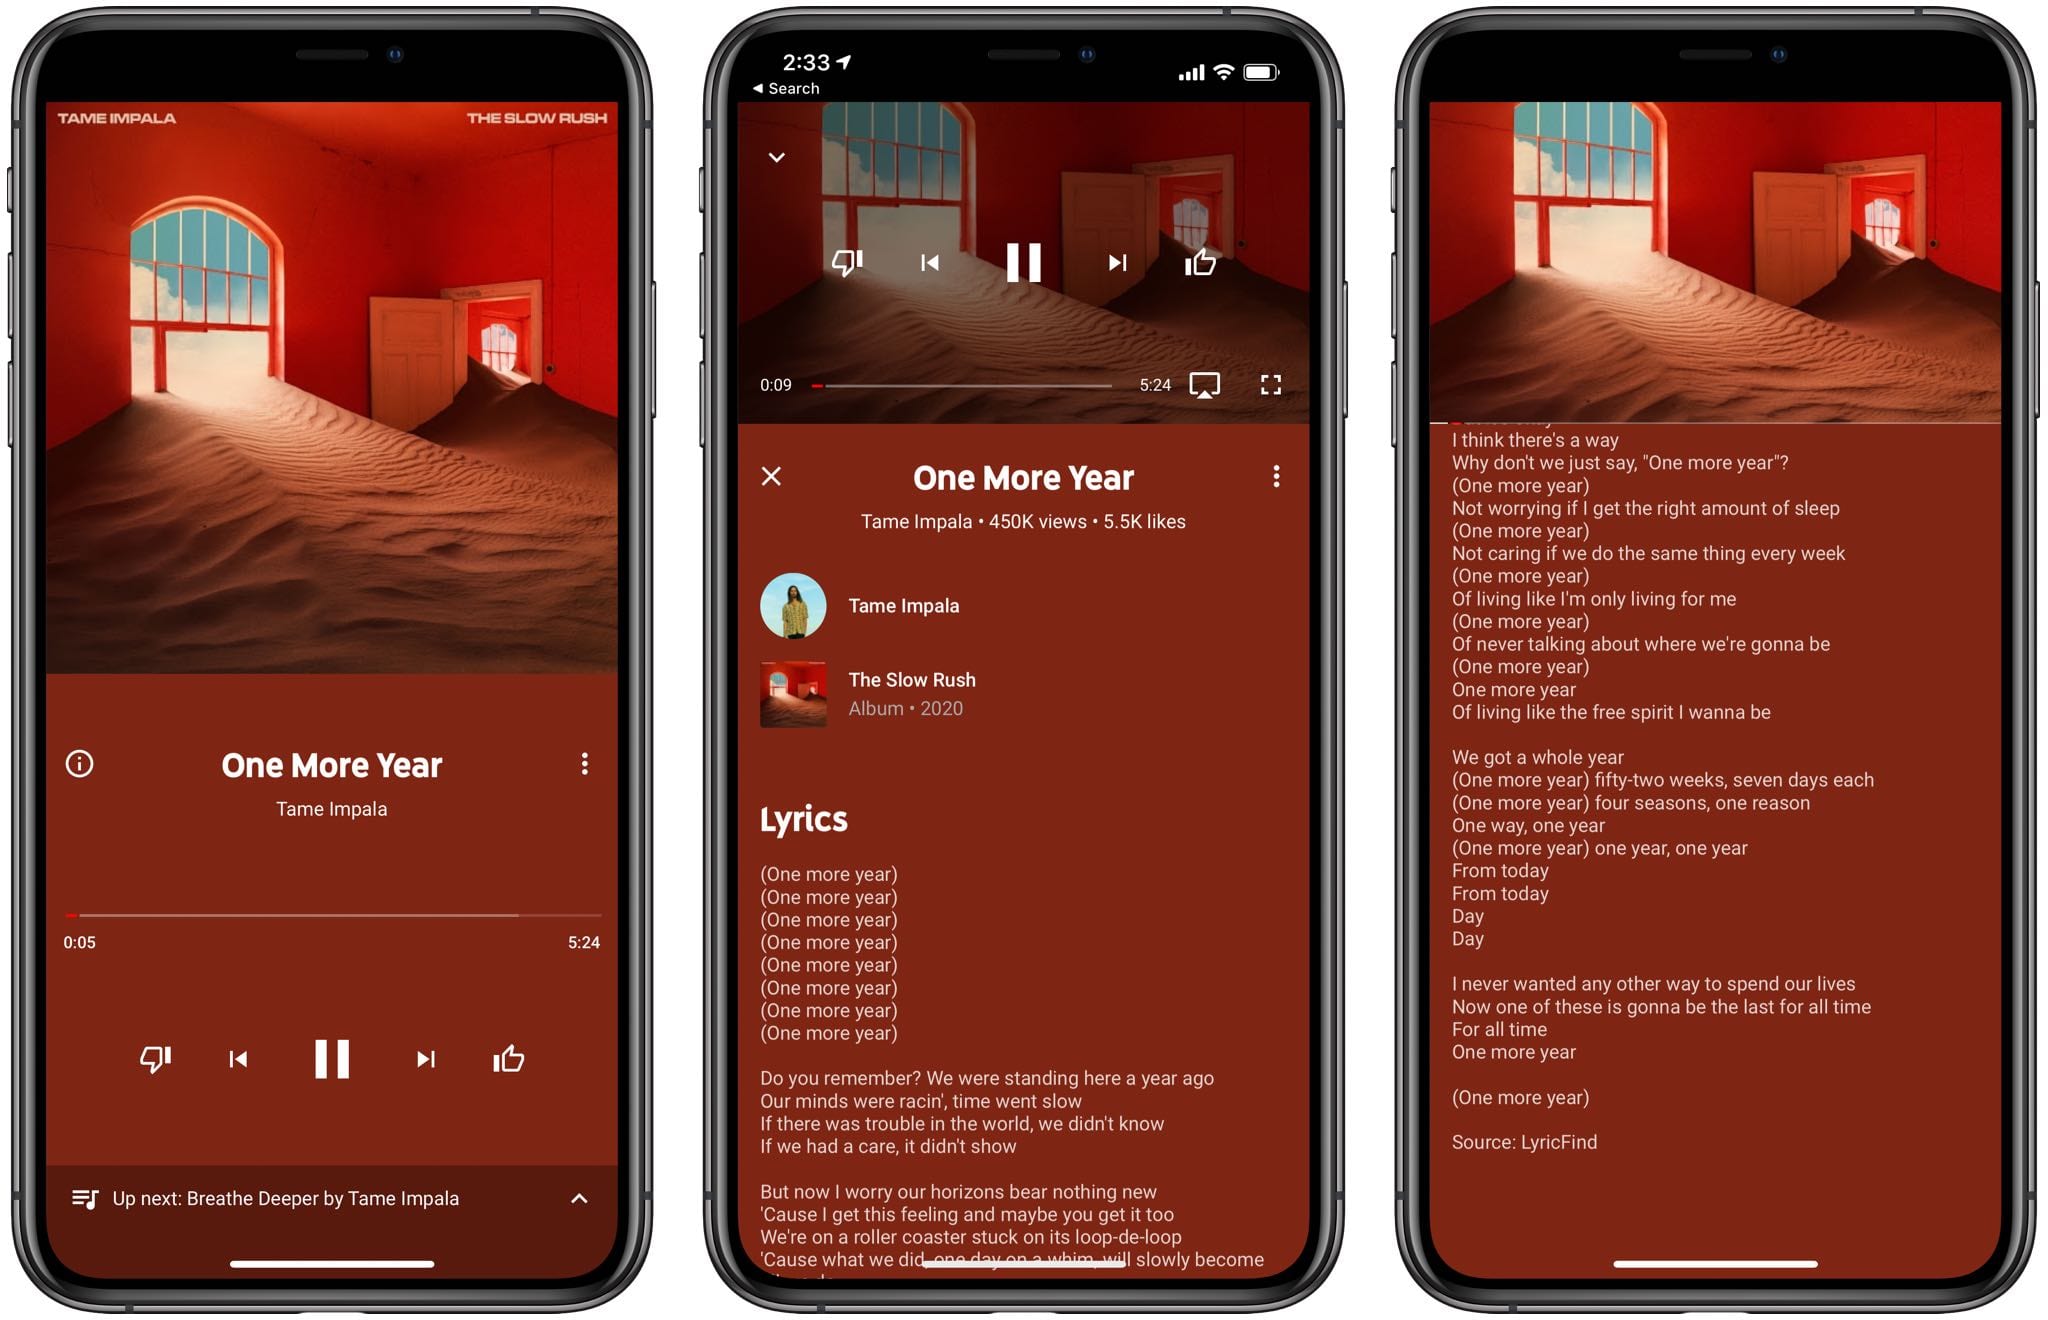 YouTube Music's New Feature: Real-Time Lyrics